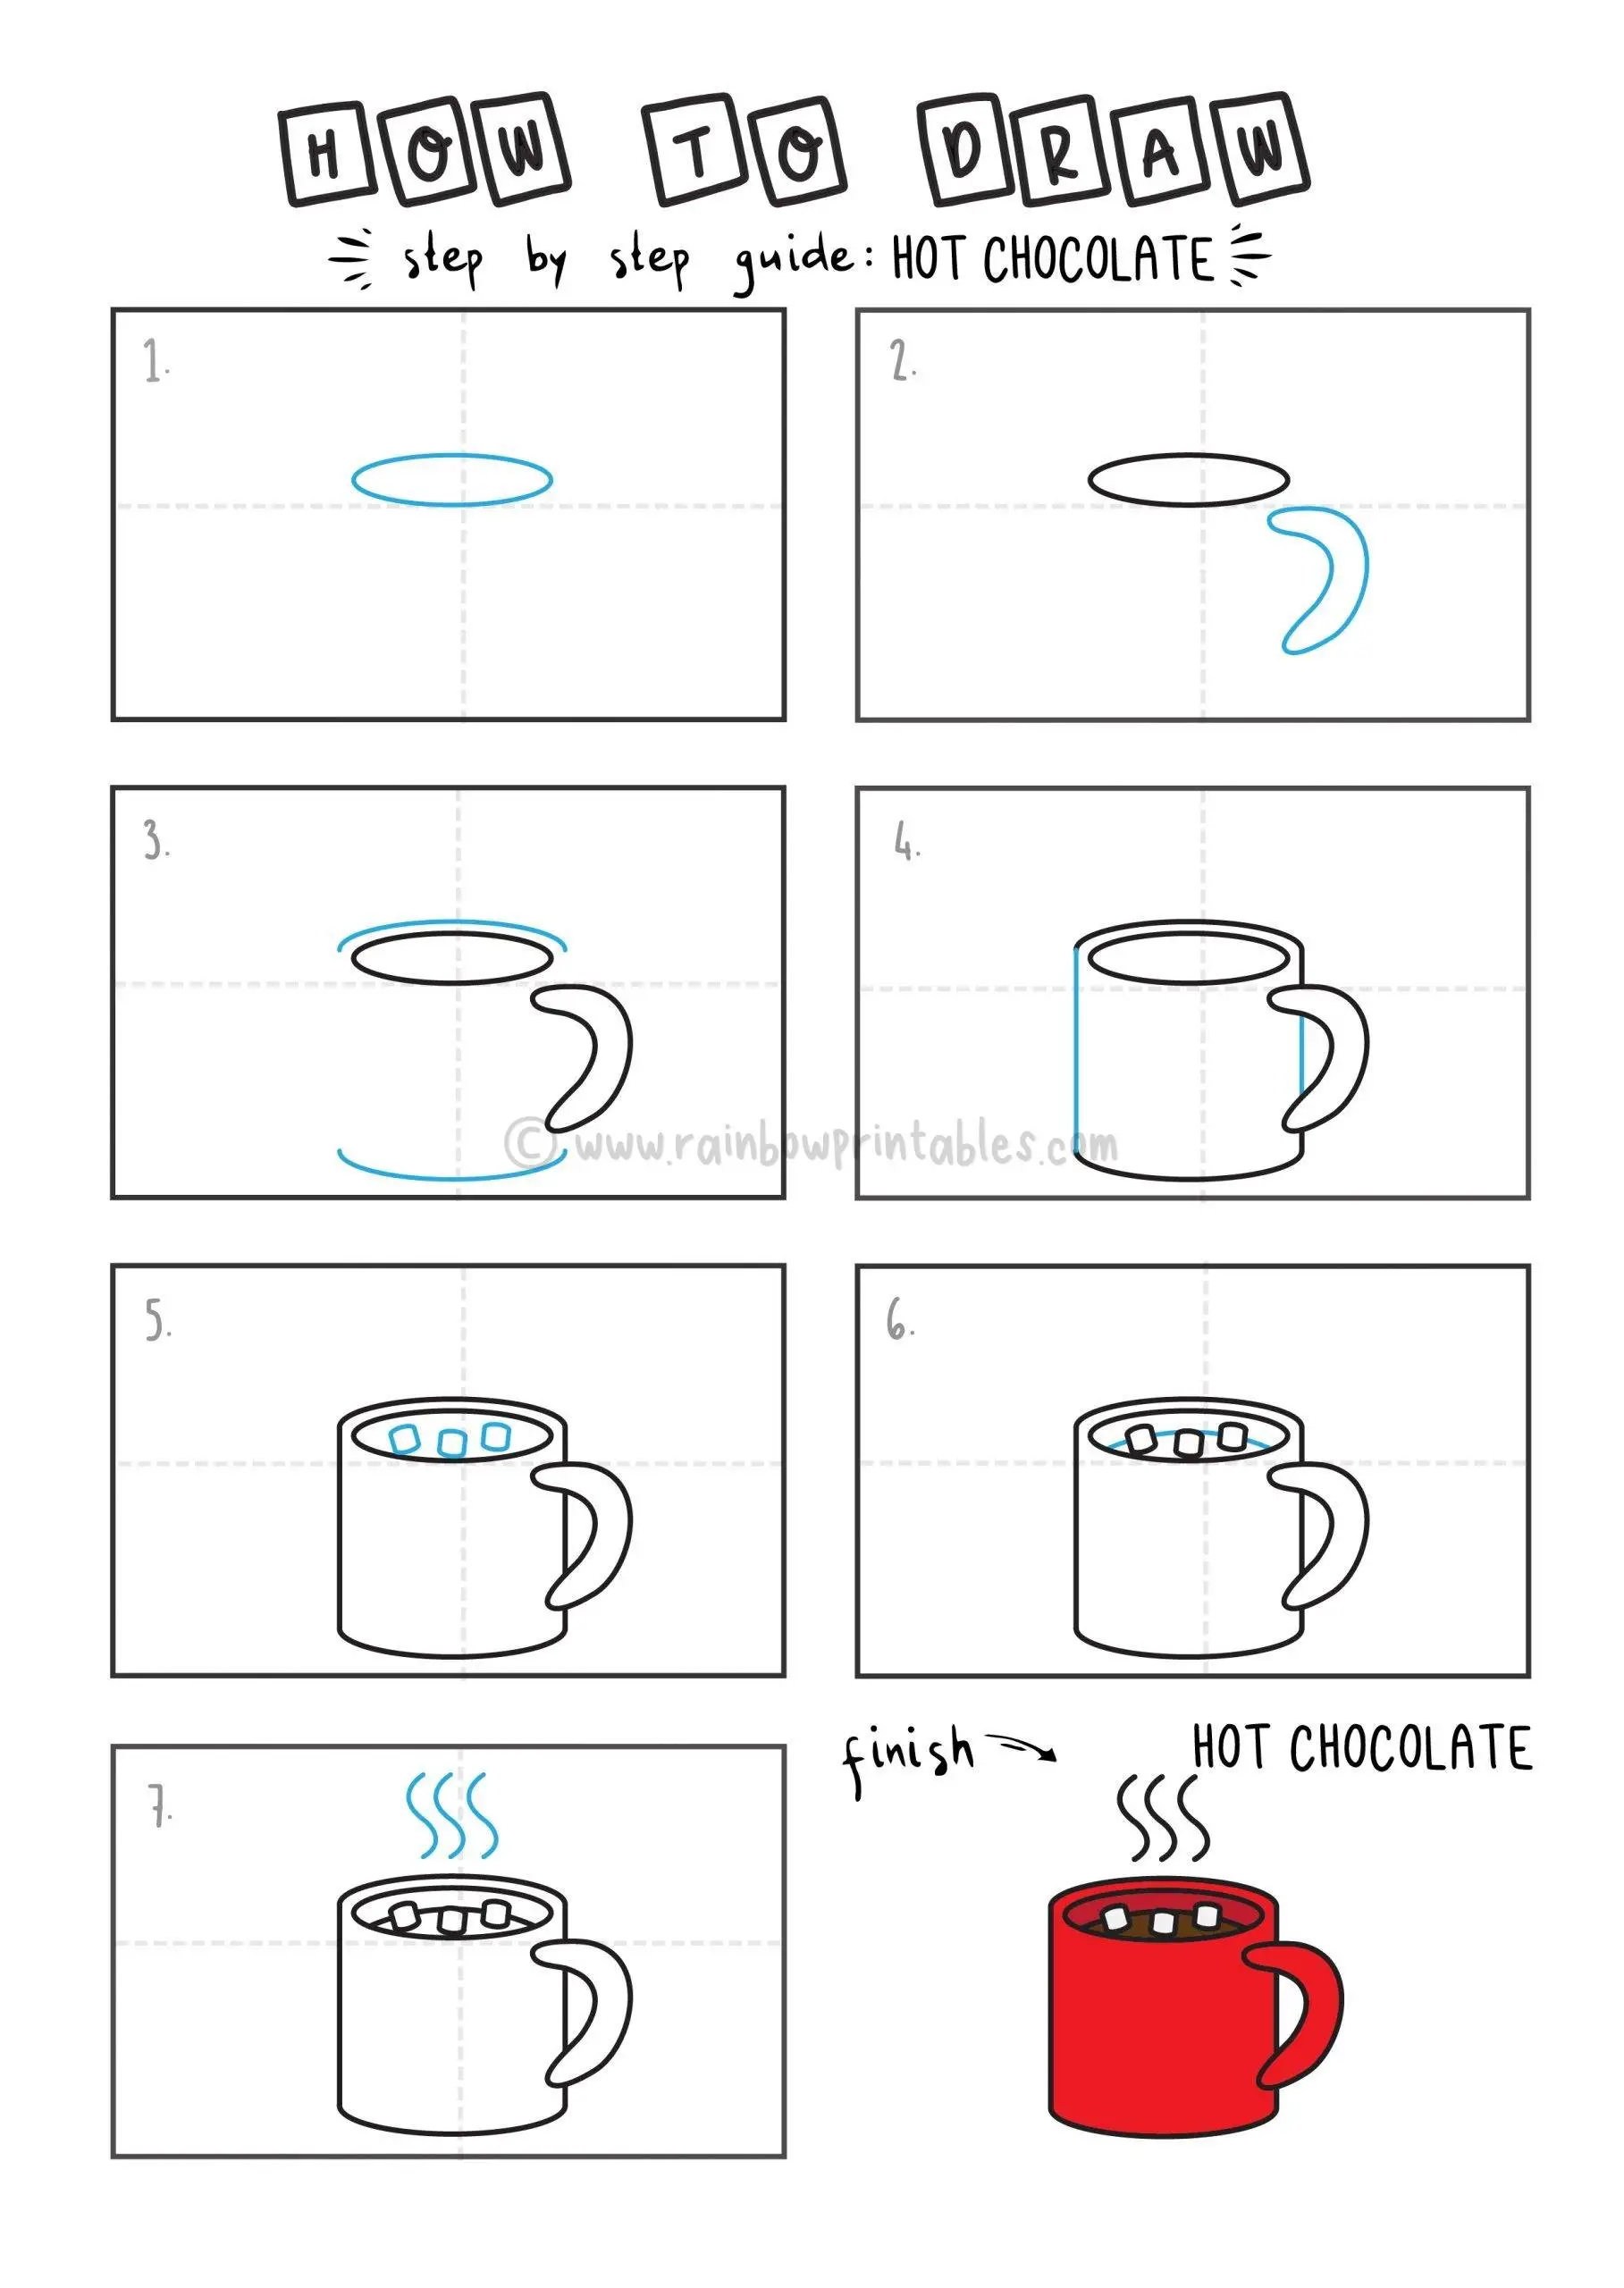 HOW TO DRAW A HOT CHOCOLATE FOR YOUNG KIDS EASY DRAWINGS ART GUIDE STEP BY STEP